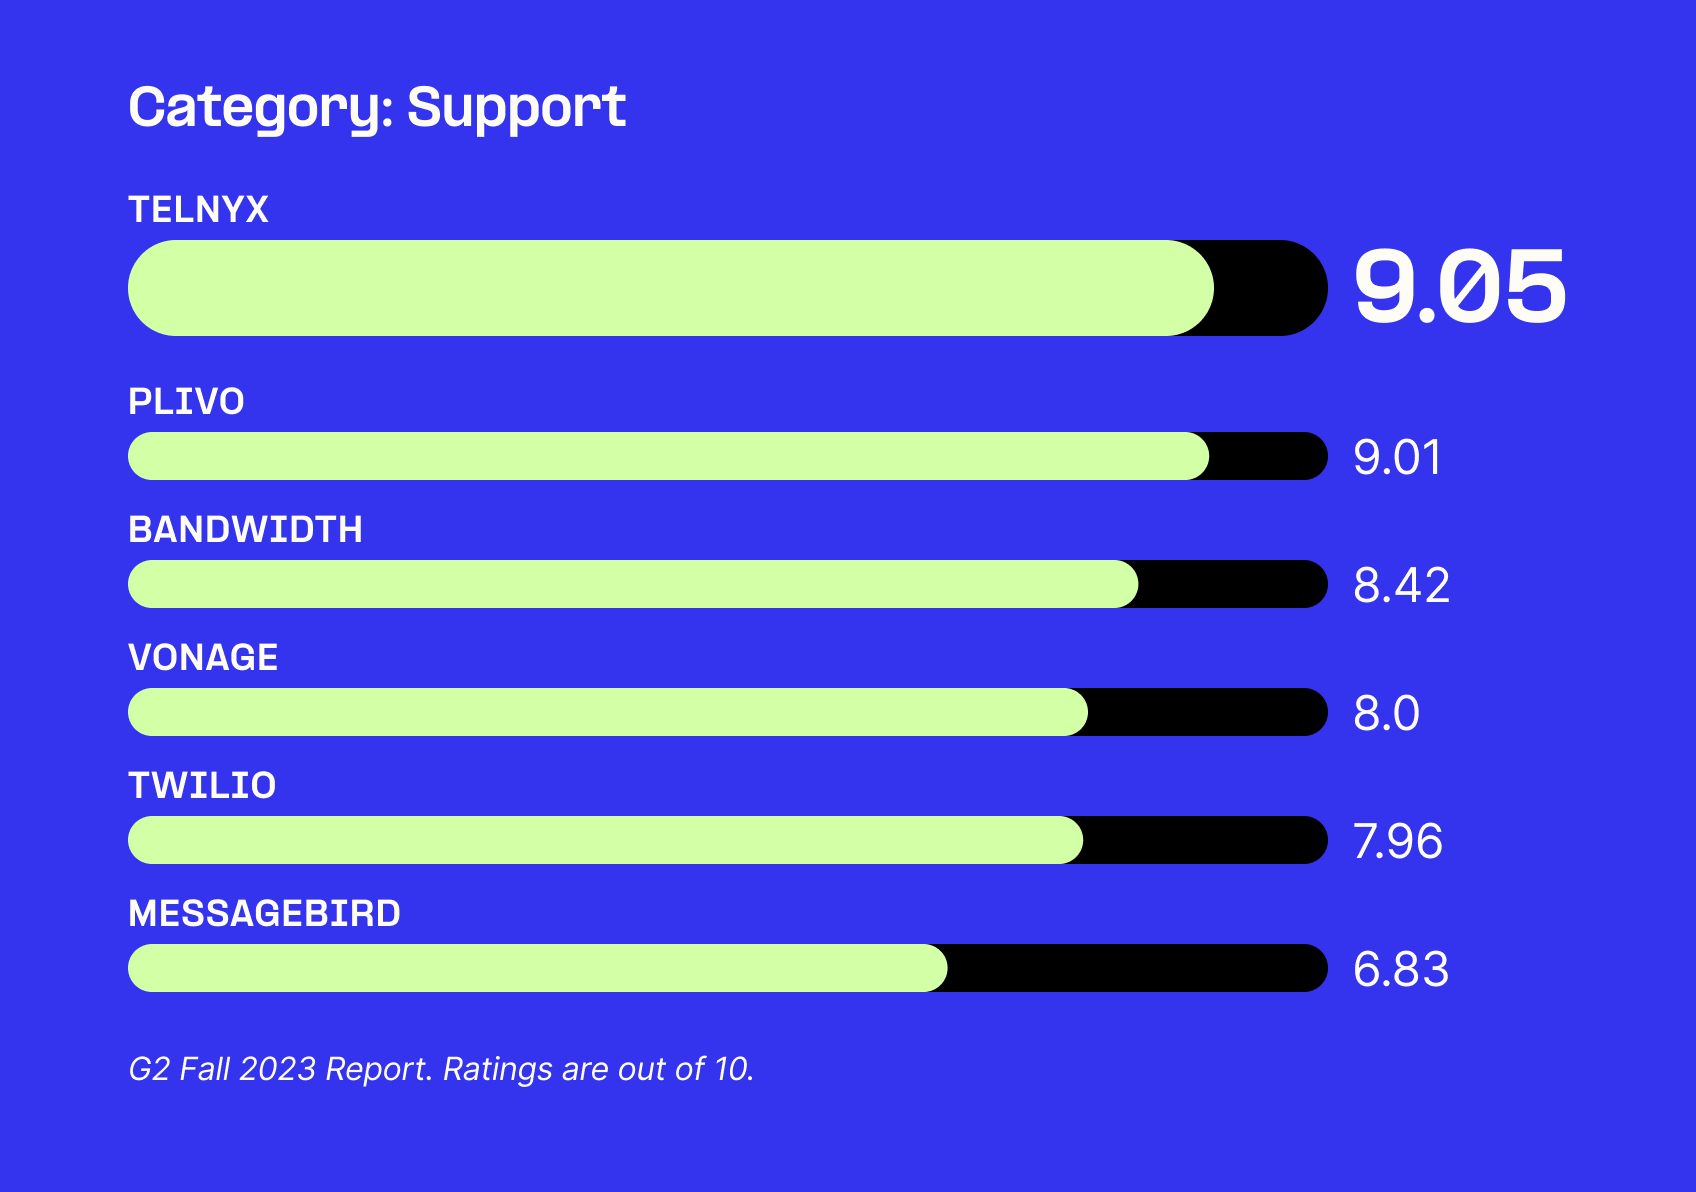 Telnyx leads in "Best Support" at 94%.